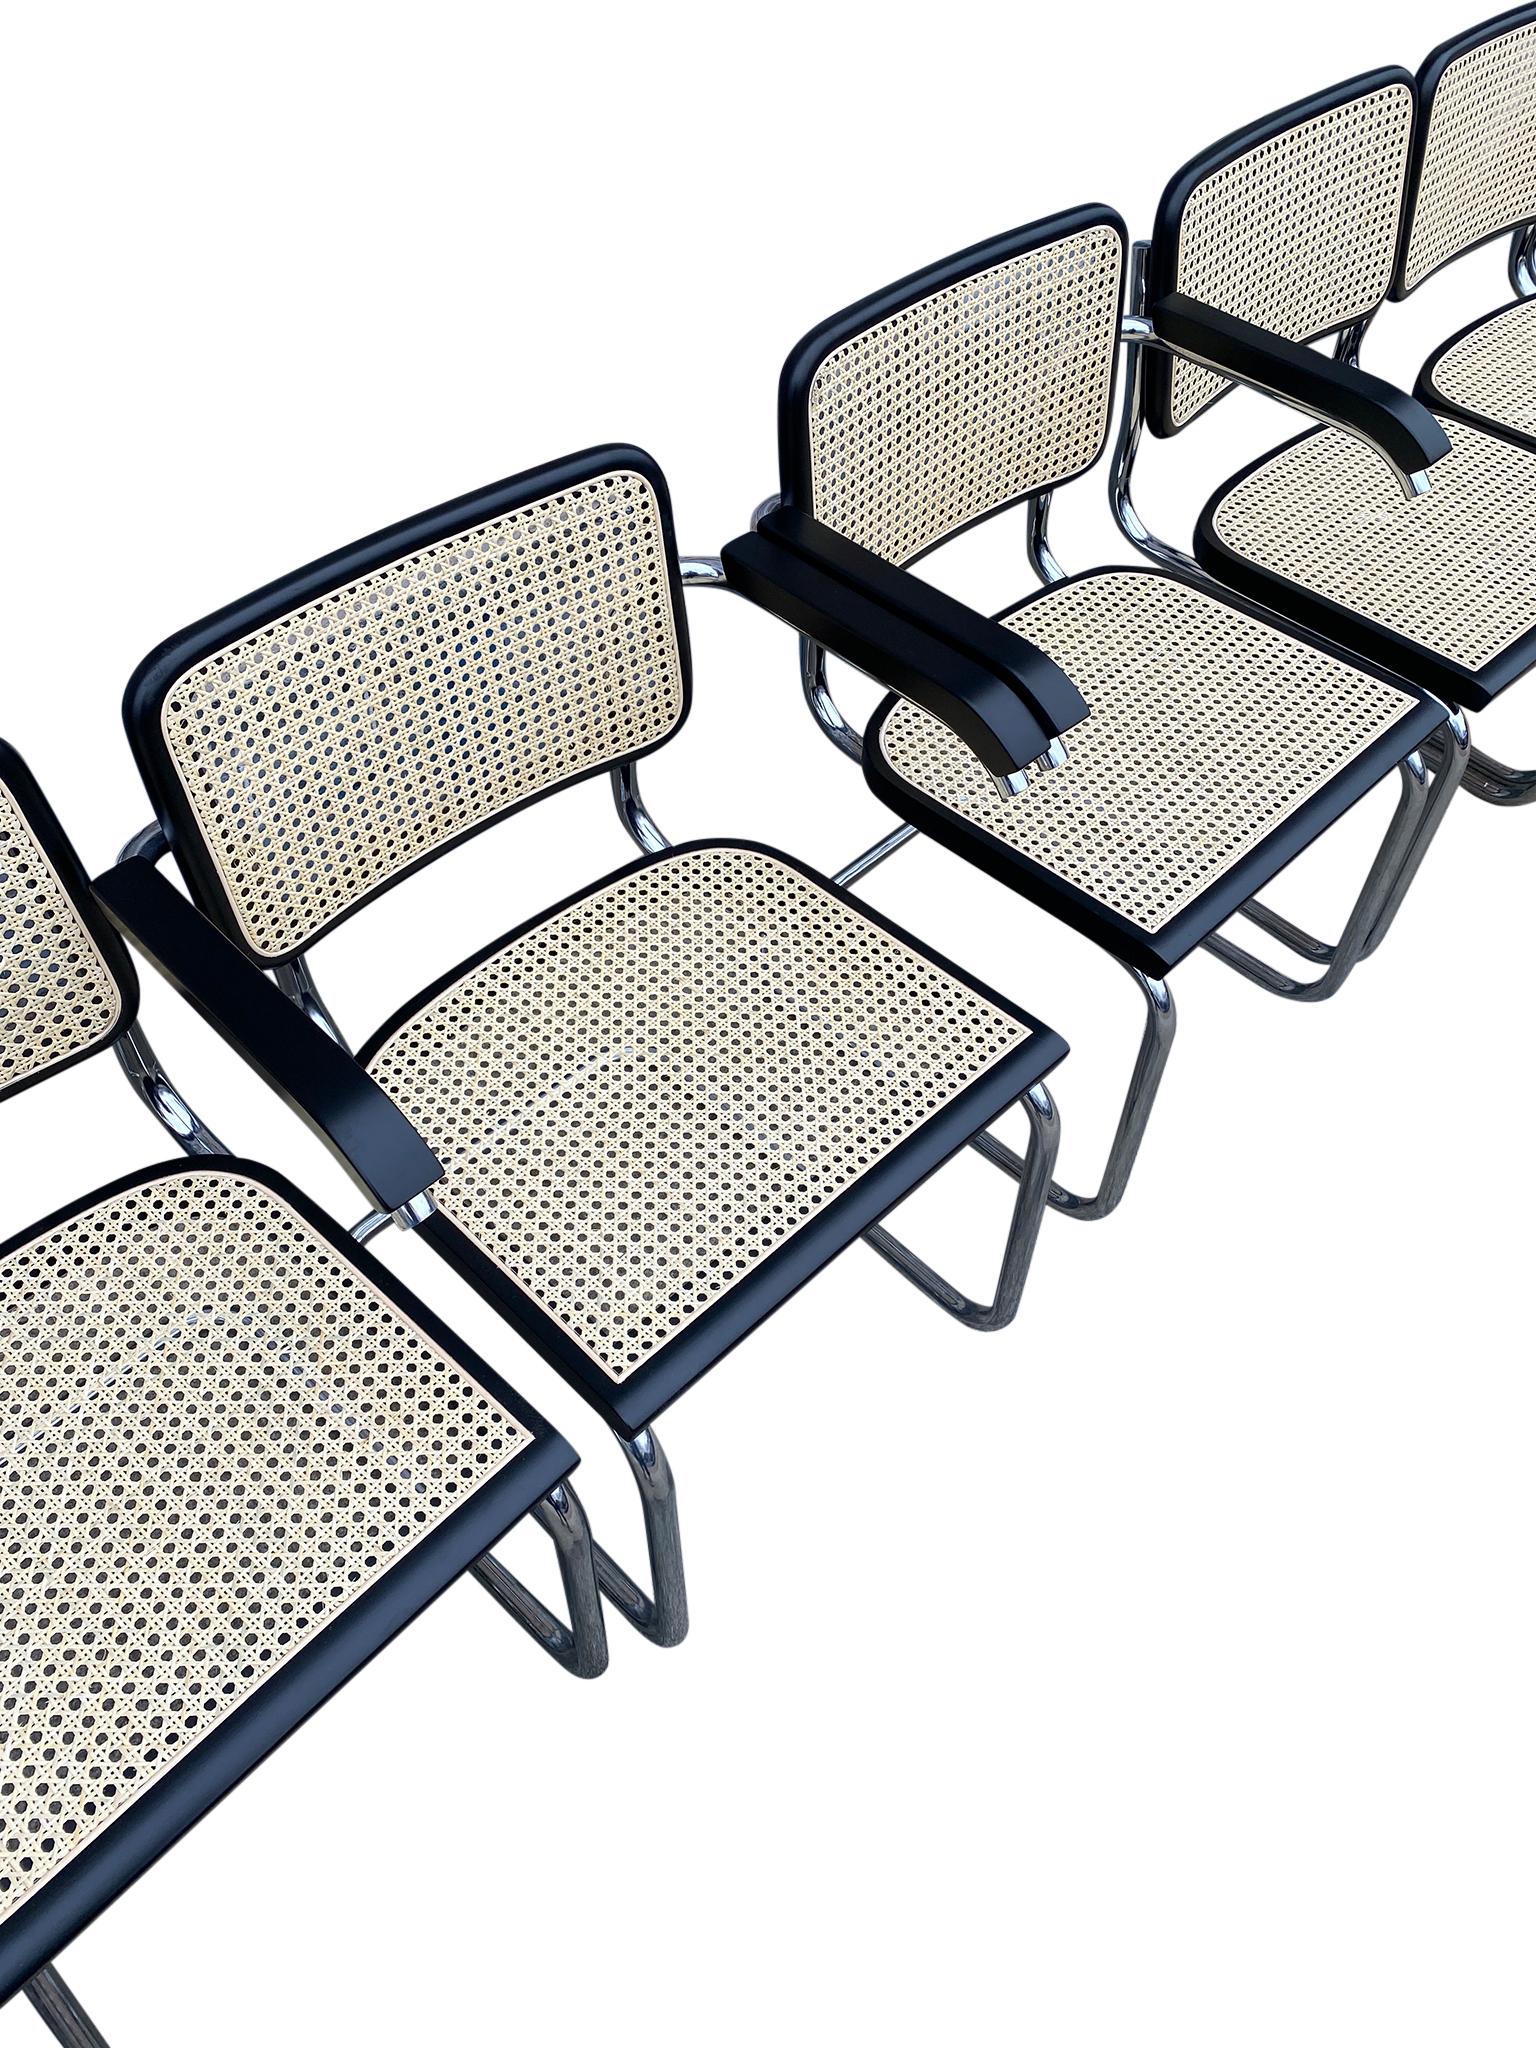 North American Set of 10 Midcentury Cesca Chairs by Marcel Breuer Thonet